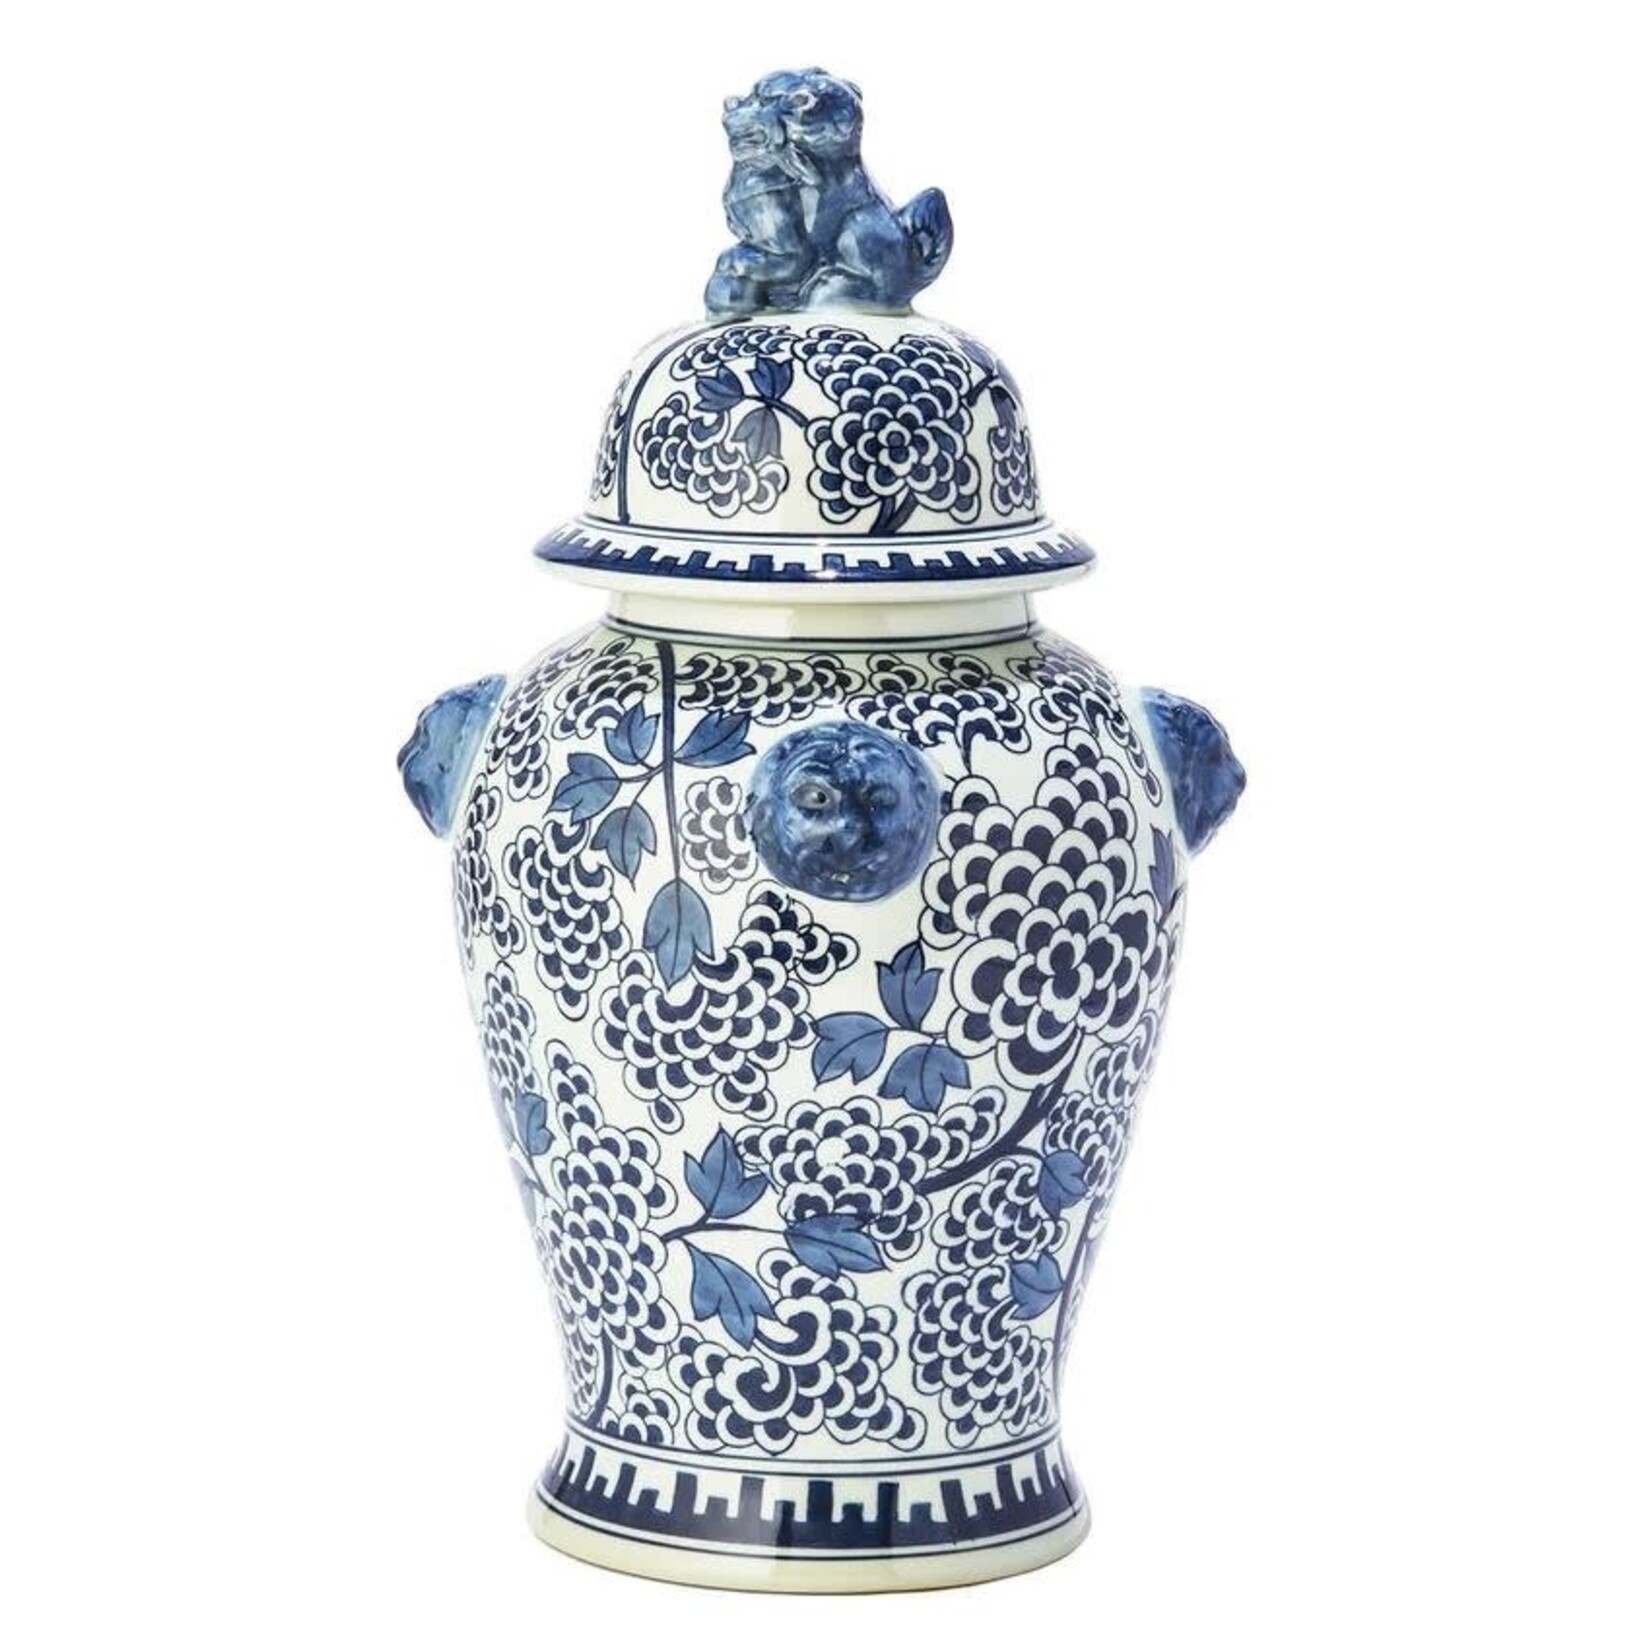 Tozai Blue and White Peony Flower Covered Temple Jar